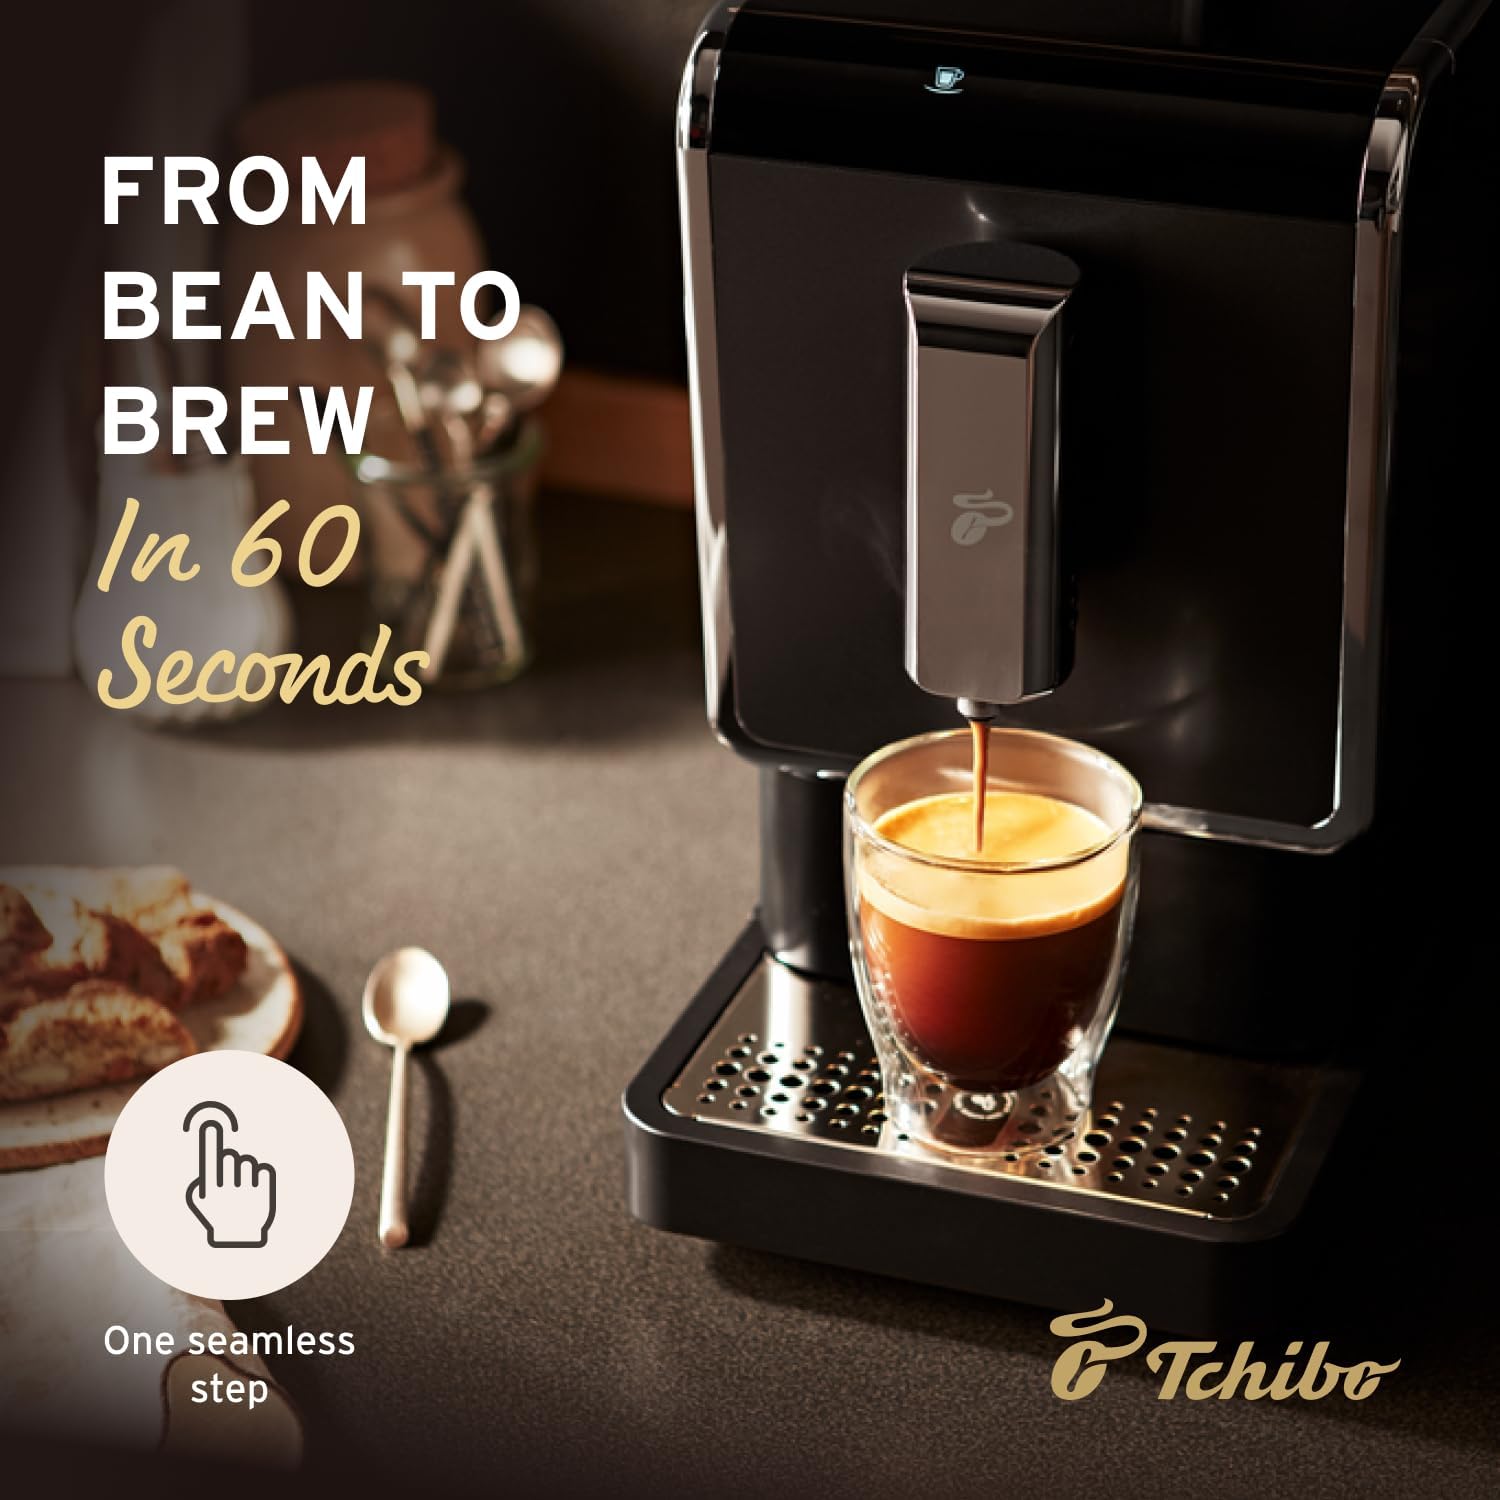 Tchibo Single Serve Coffee Maker - Automatic Espresso Coffee Machine - Built-in Grinder, No Coffee Pods Needed - Comes with 2 x 17.6 Ounce Bags of Whole Beans